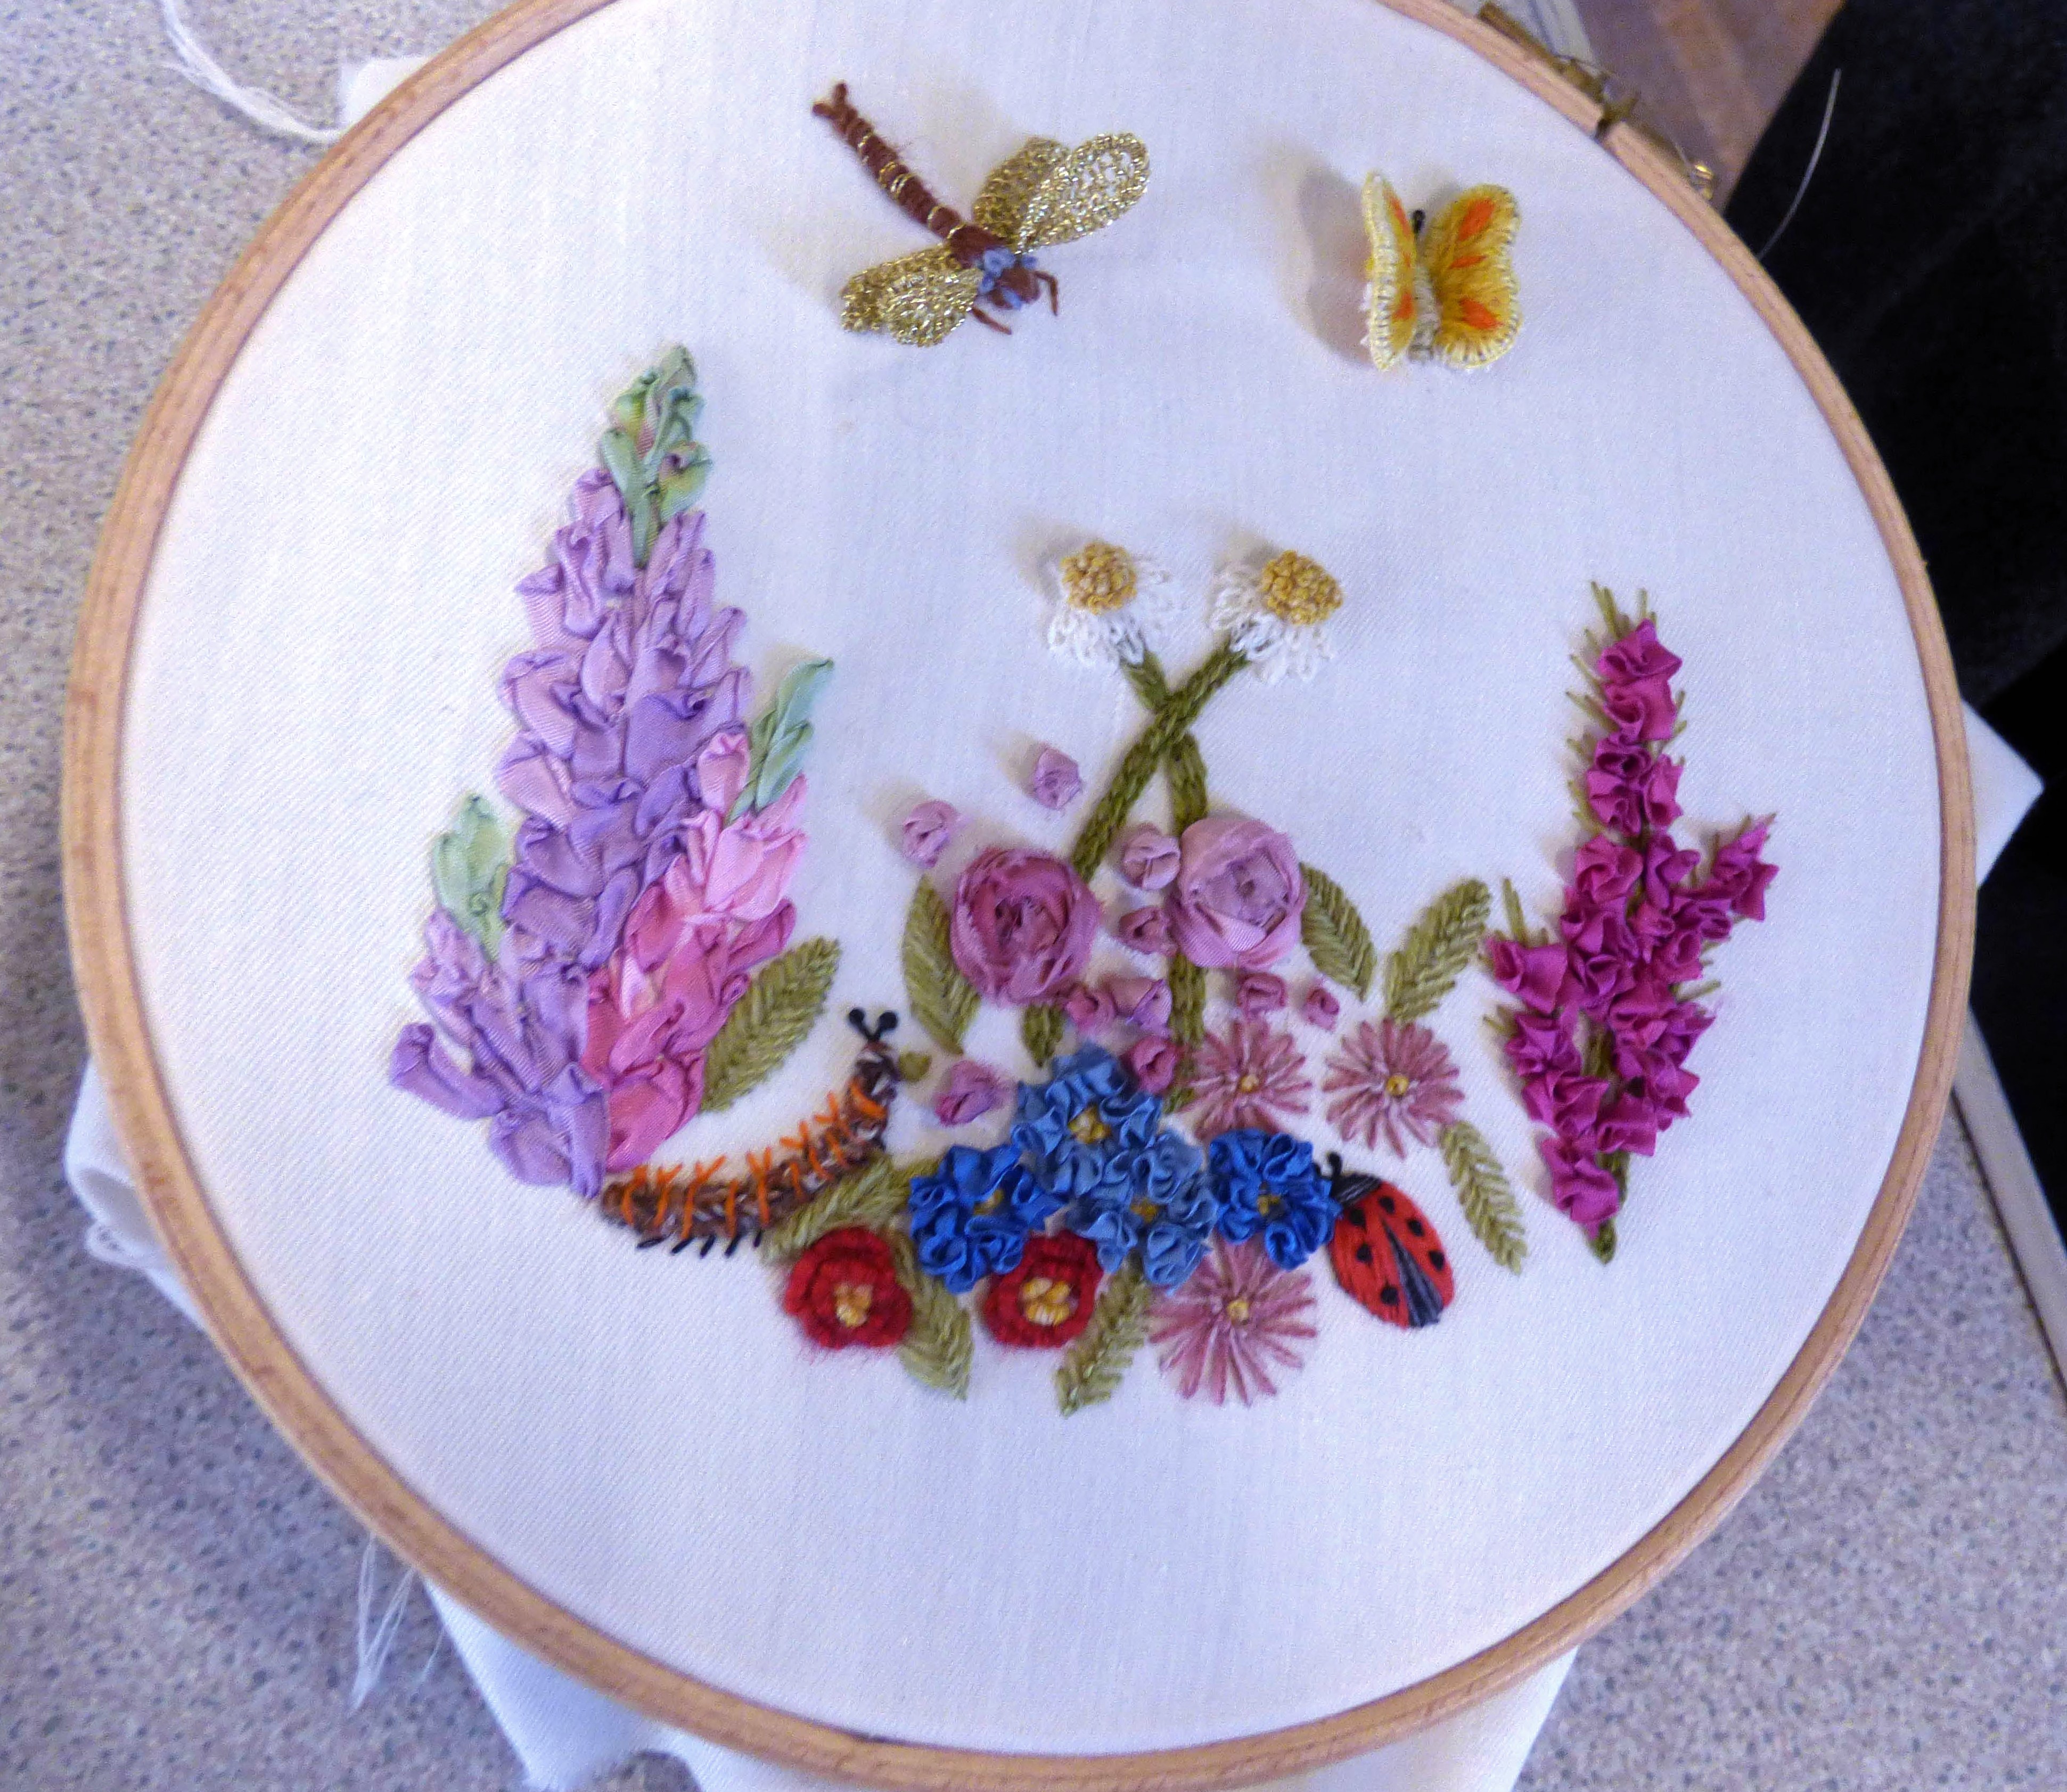 a sample of embroidery by Tina Saunders at "An Embroiderer's Tale" a Talk by Tina Saunders, Jan 2022